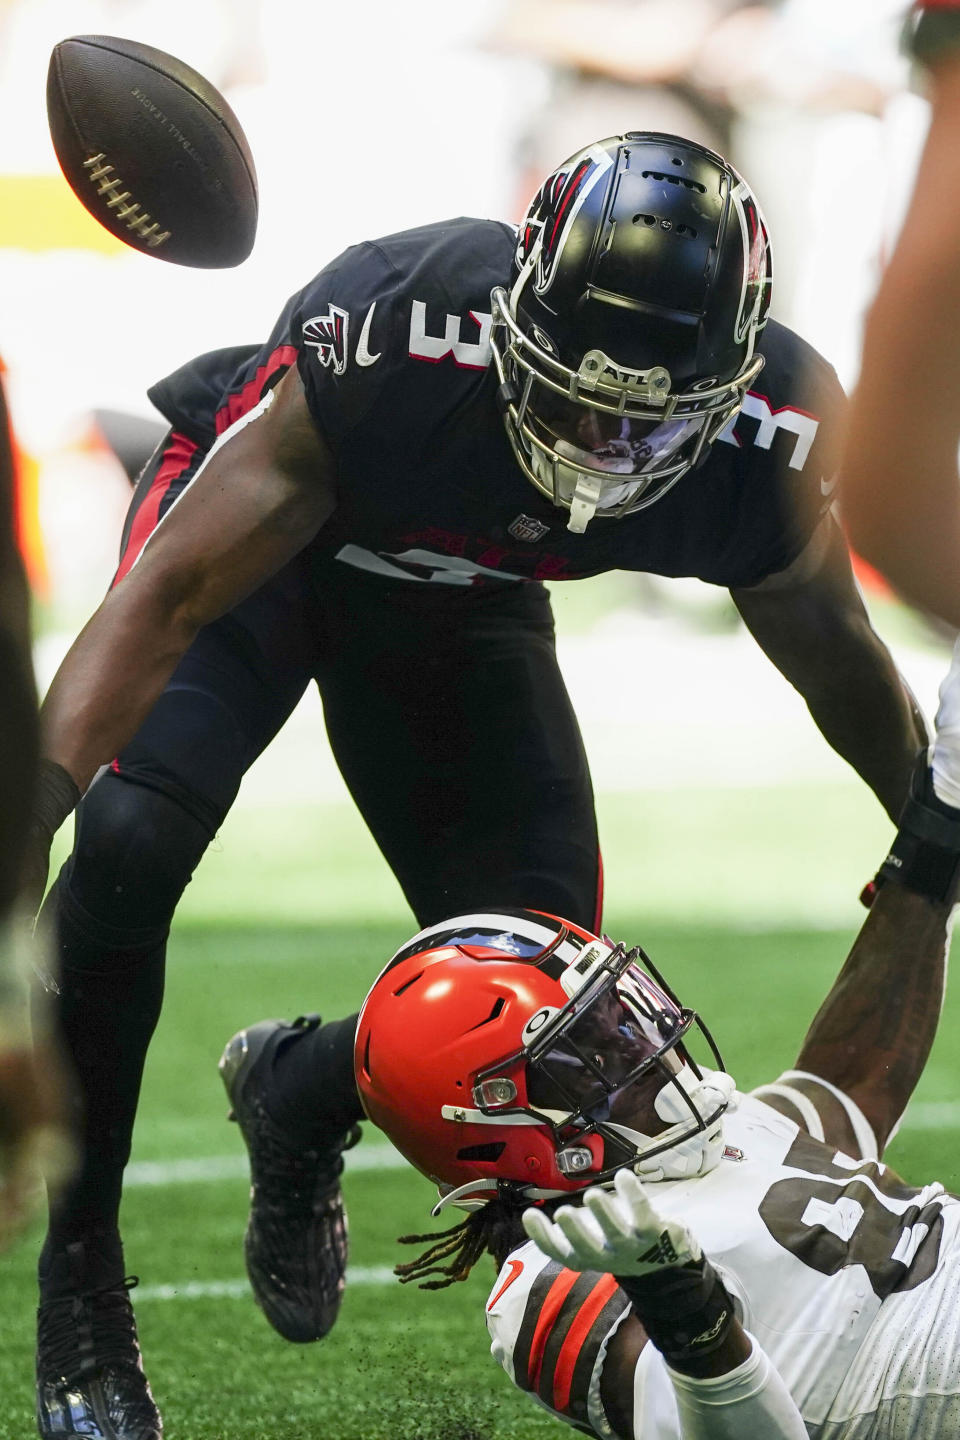 Cleveland Browns tight end David Njoku (85) fumbles after his catch against Atlanta Falcons linebacker Mykal Walker (3) during the first half of an NFL football game, Sunday, Oct. 2, 2022, in Atlanta. (AP Photo/John Bazemore)